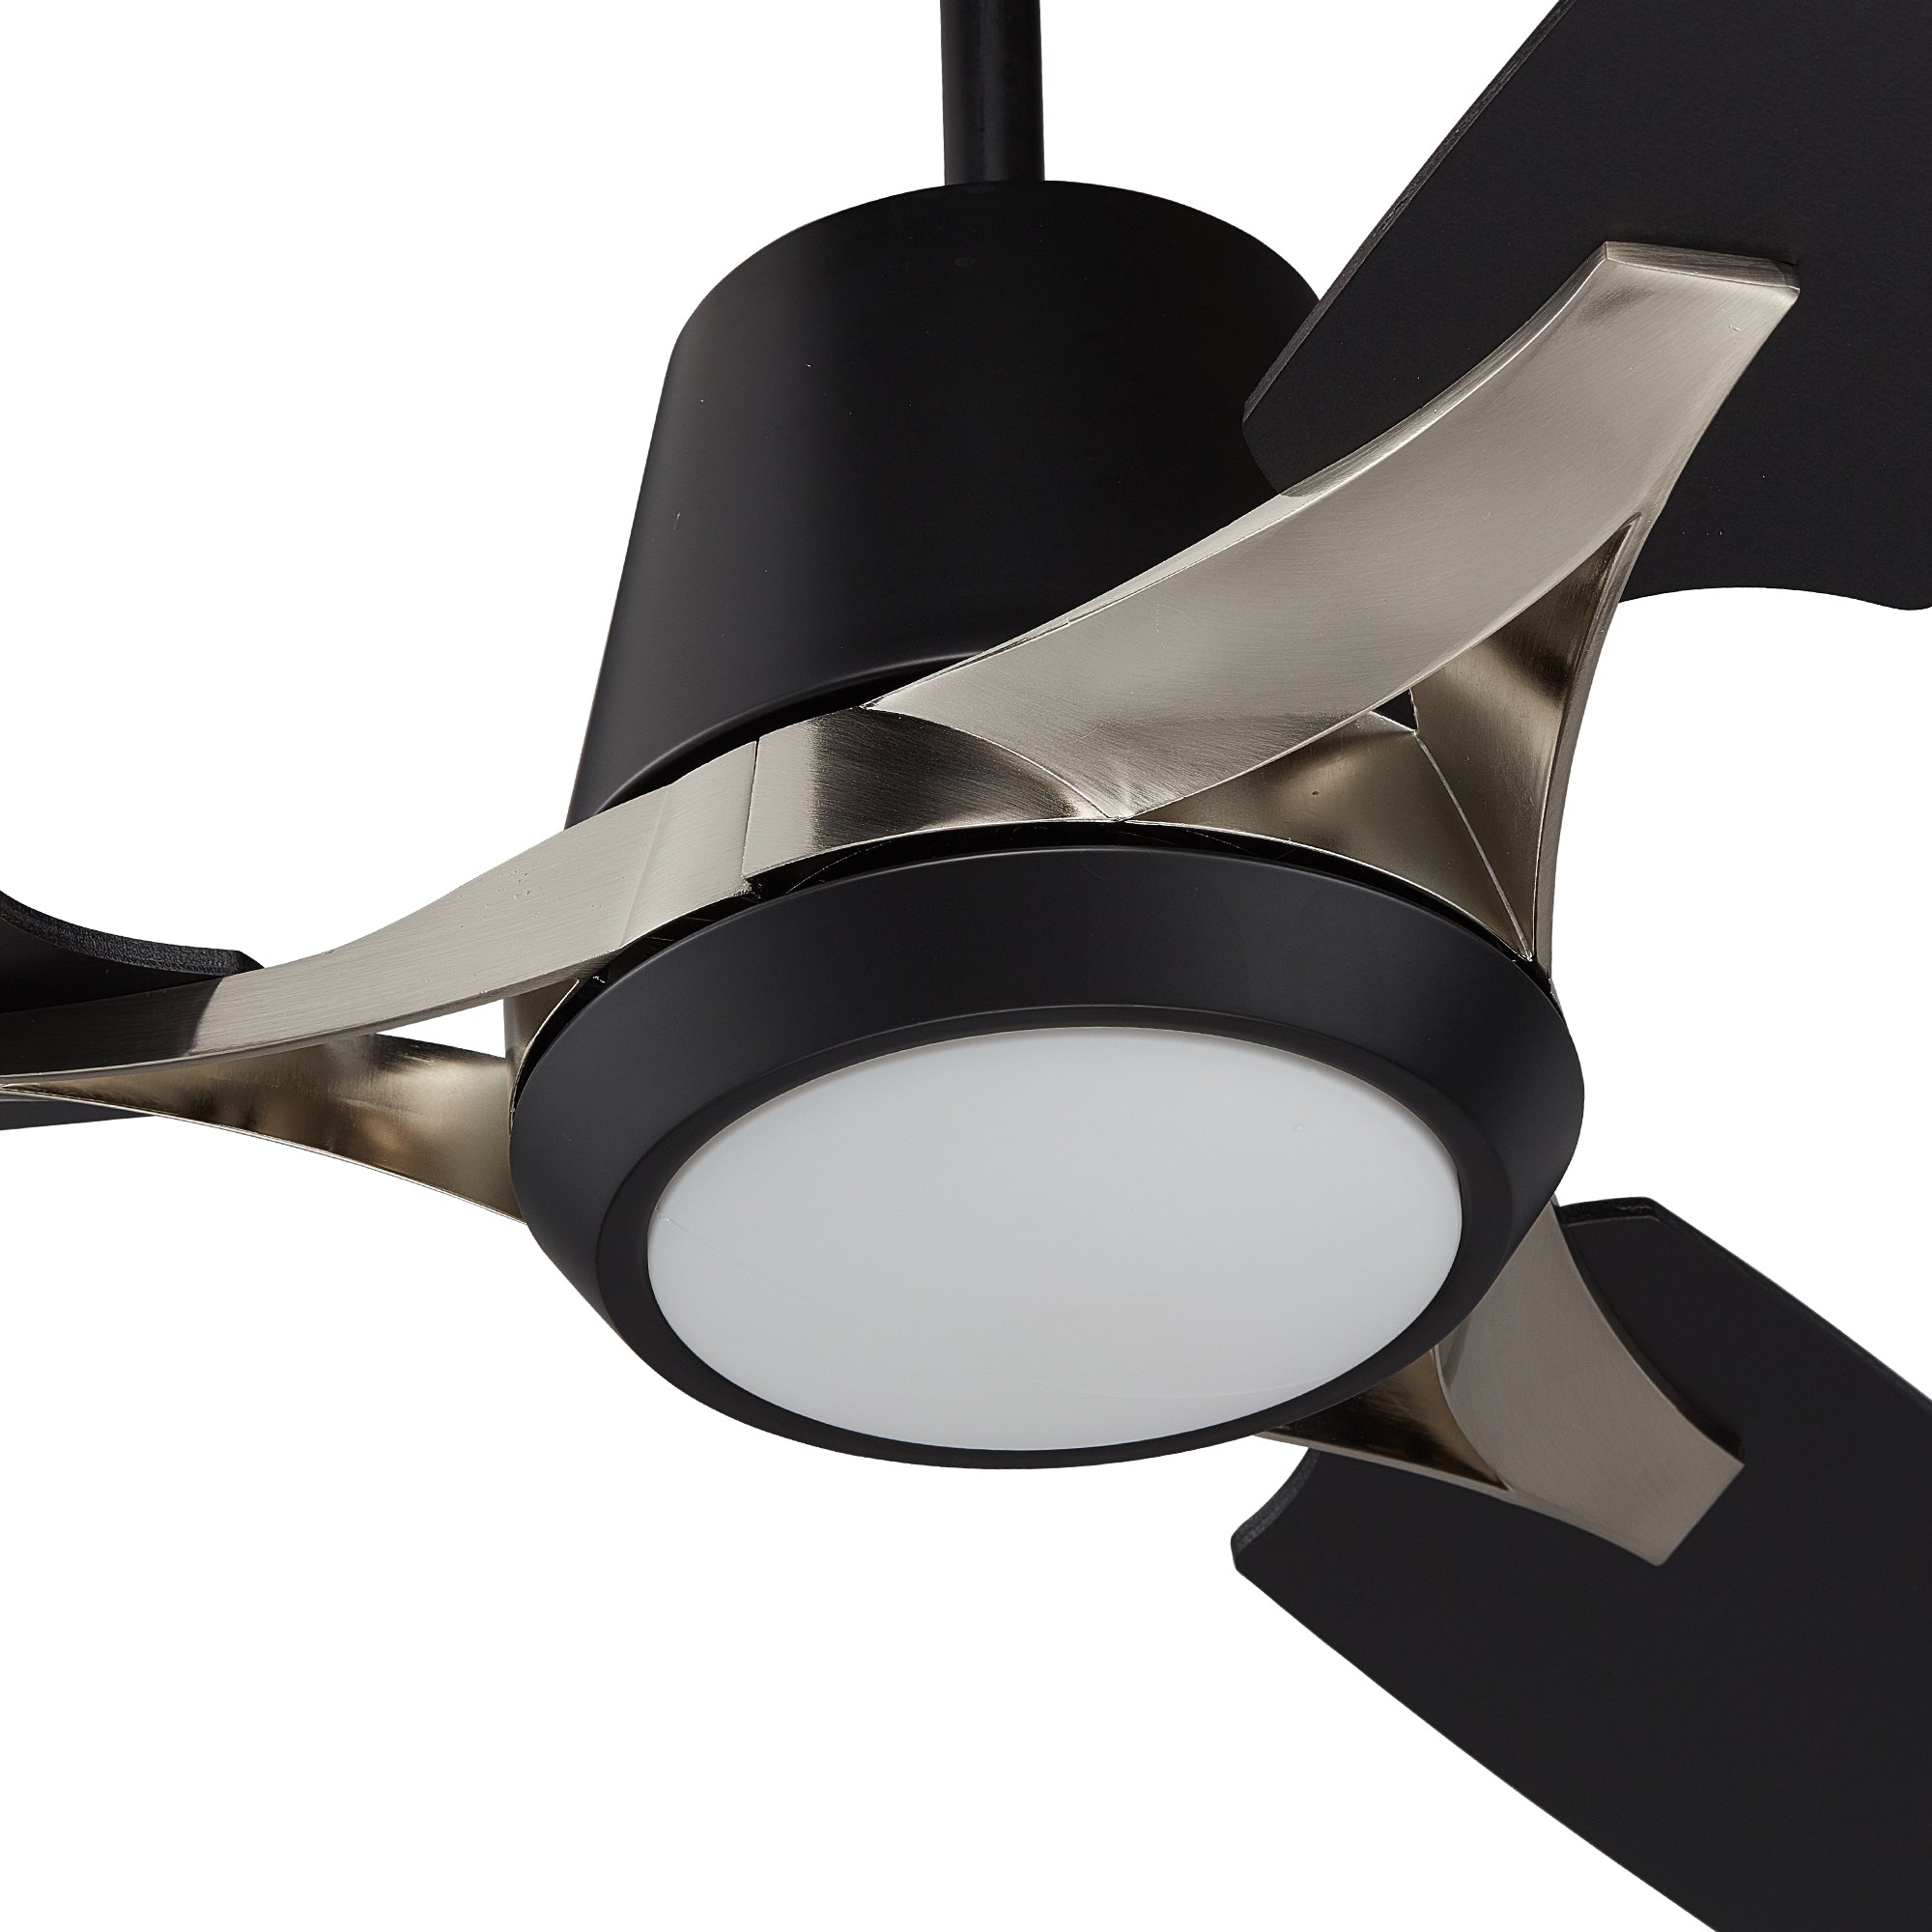 The Smafan Exton 52'' Smart Ceiling Fan keeps your space cool, bright, and stylish. It is a soft modern masterpiece perfect for your large indoor living spaces. This Wifi smart ceiling fan is a simplicity designing with elegant Plywood blades and compatible with LED Light. The fan features wall control, Wi-Fi apps, Siri Shortcut and Voice control technology (compatible with Amazon Alexa and Google Home Assistant to set fan preferences.#color_Black